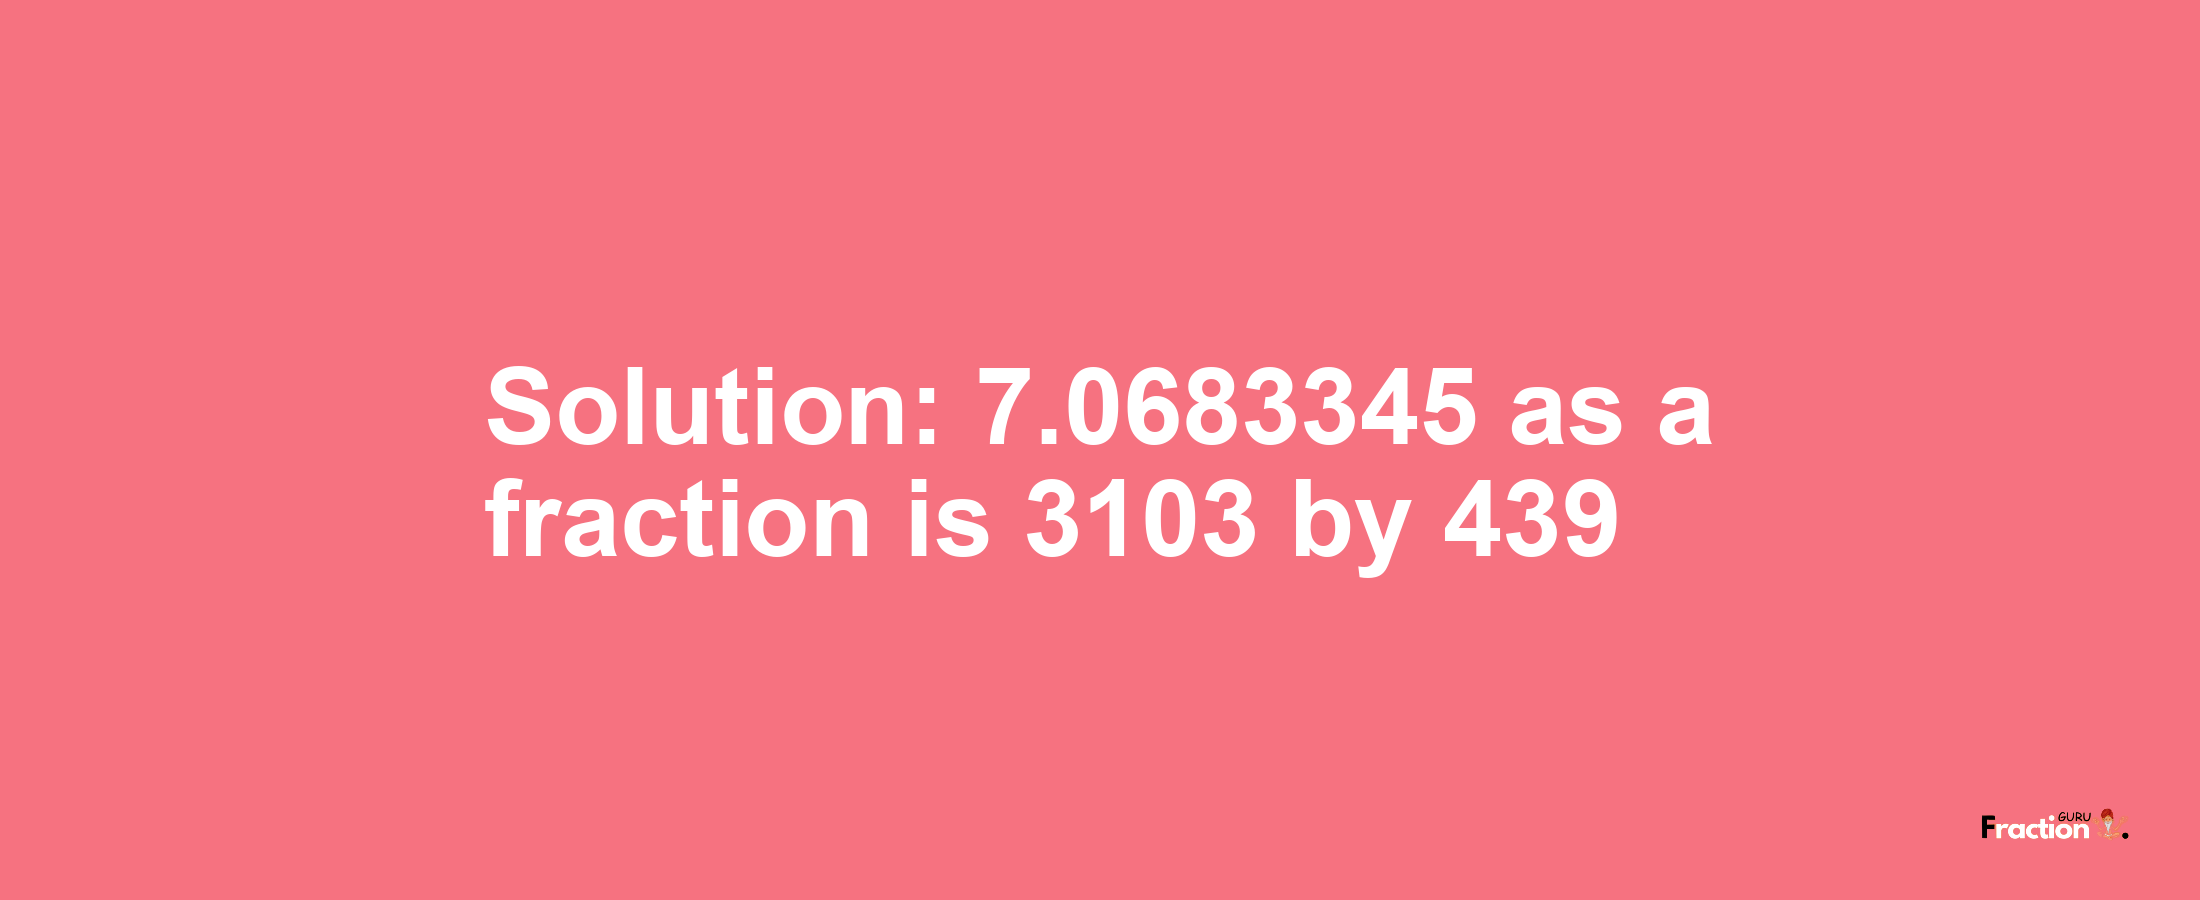 Solution:7.0683345 as a fraction is 3103/439